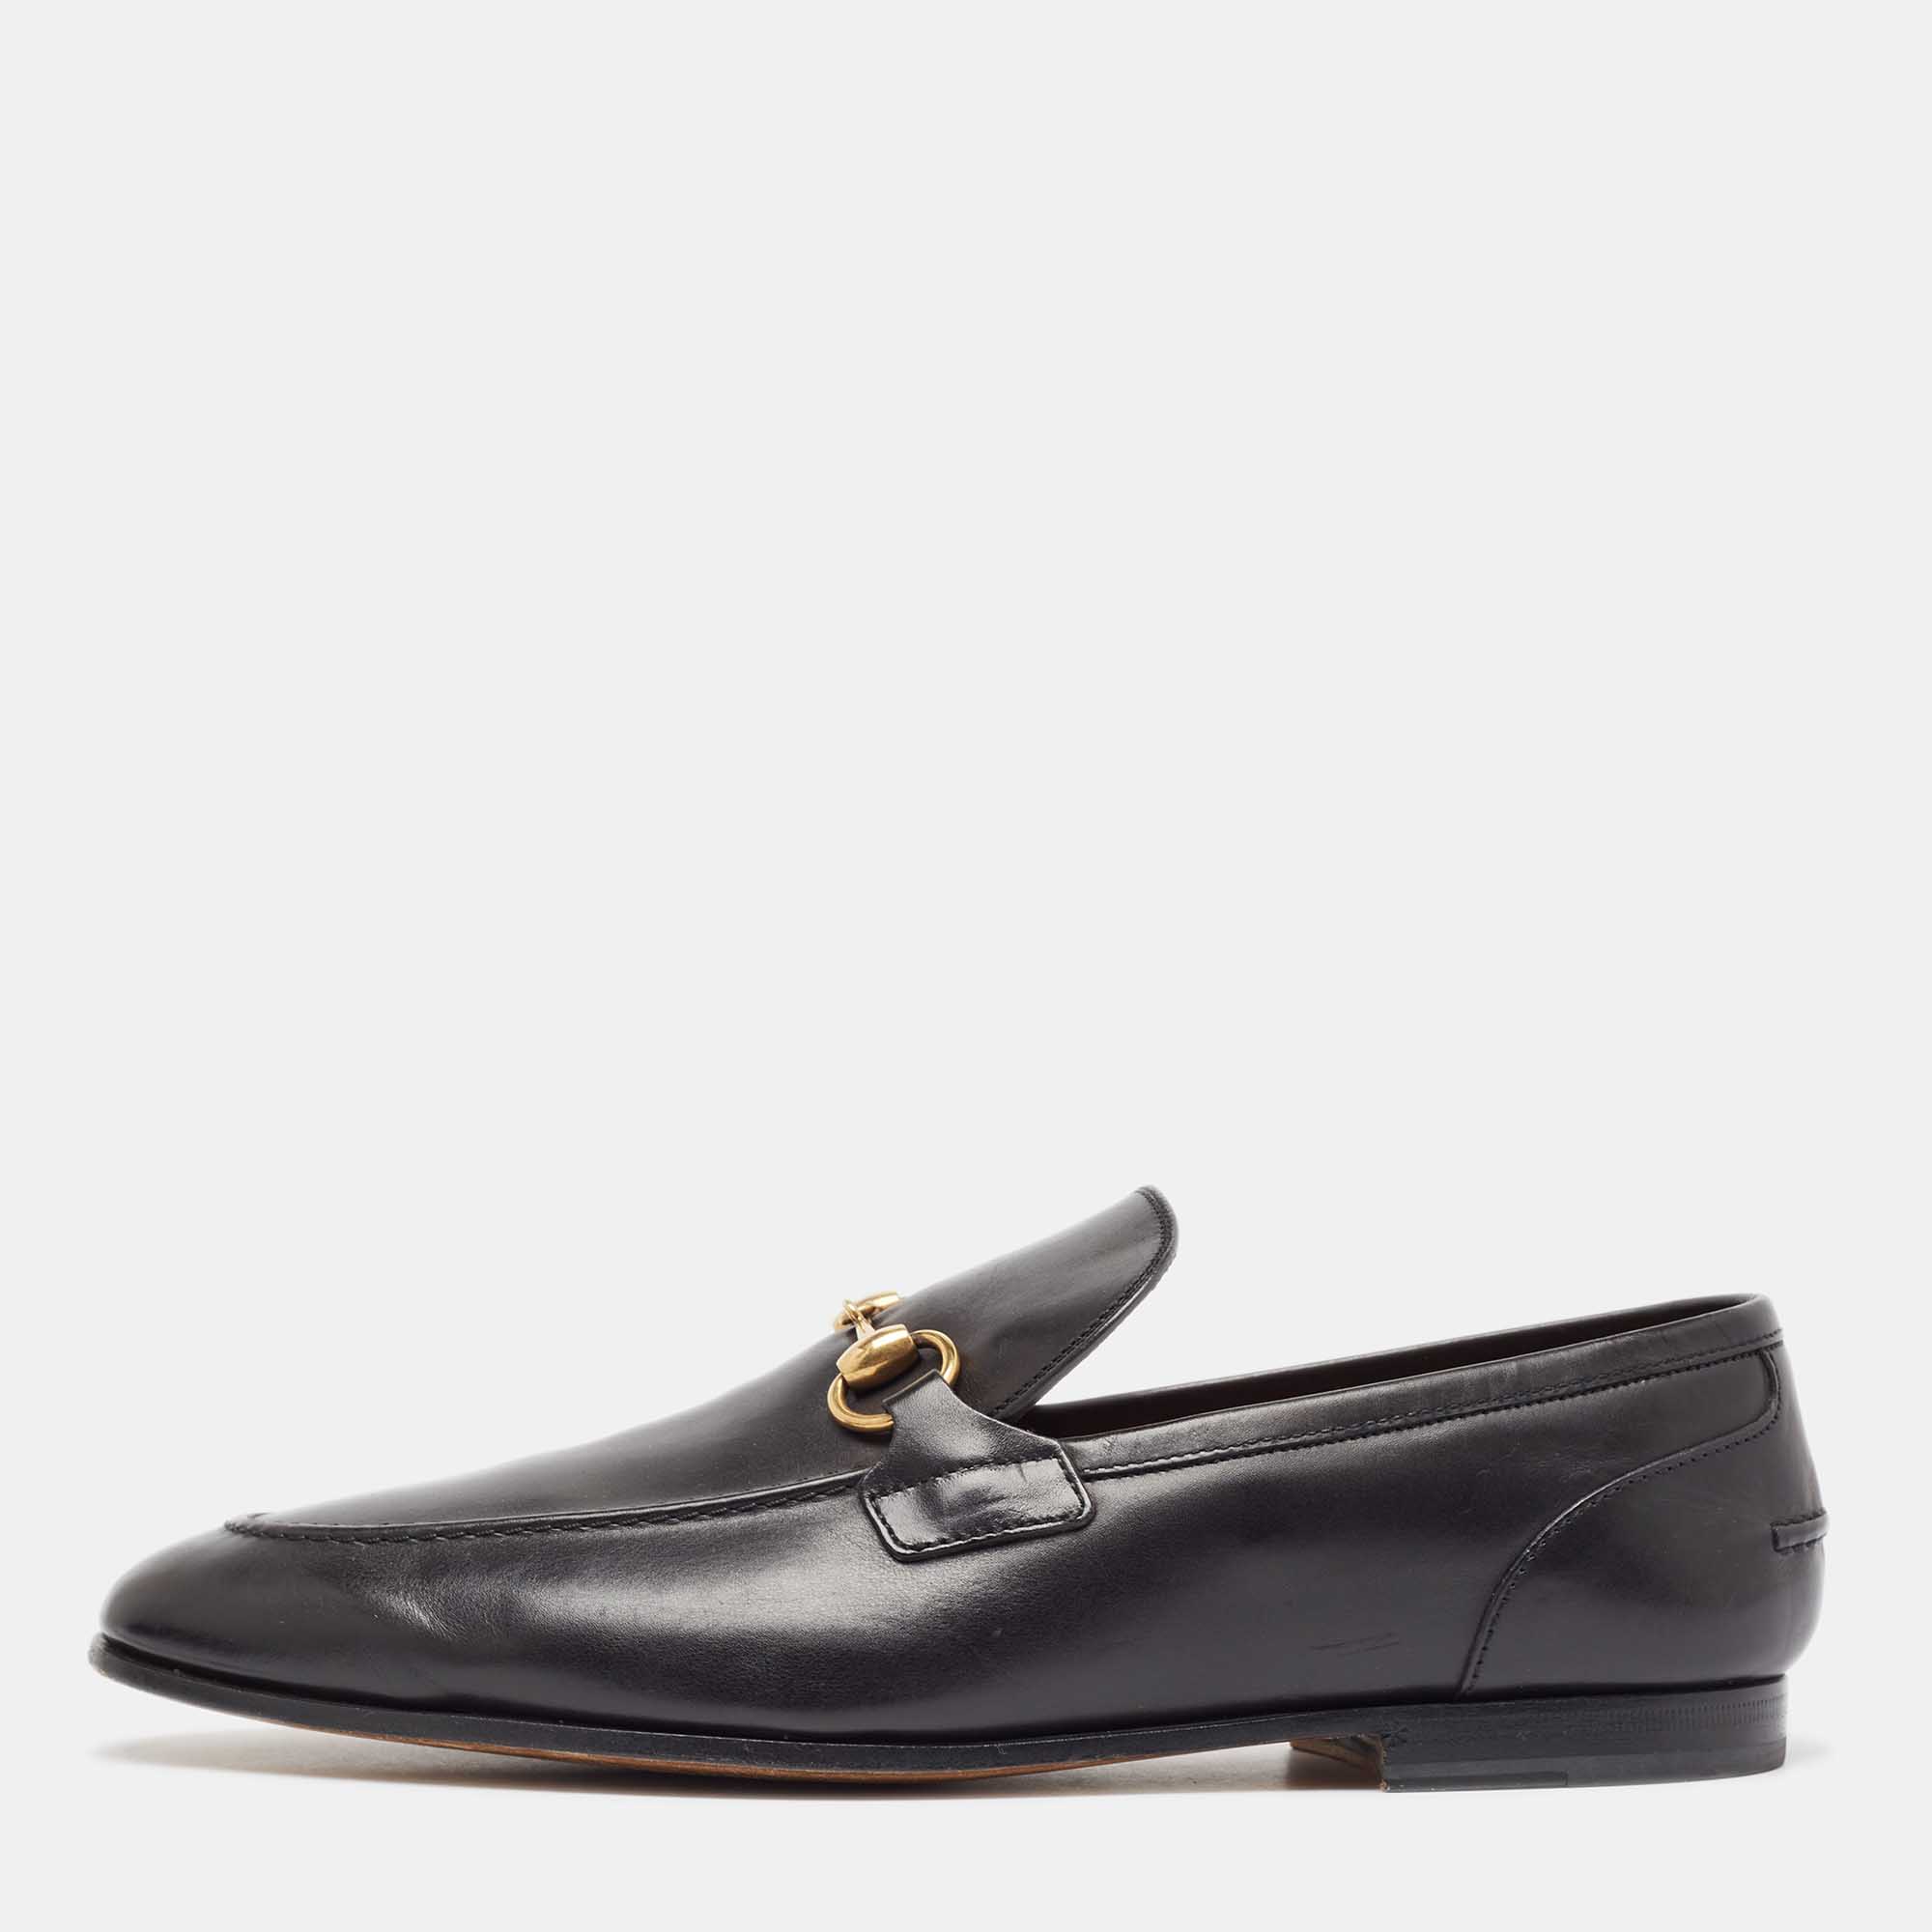 Gucci black leather jordaan loafers size 42